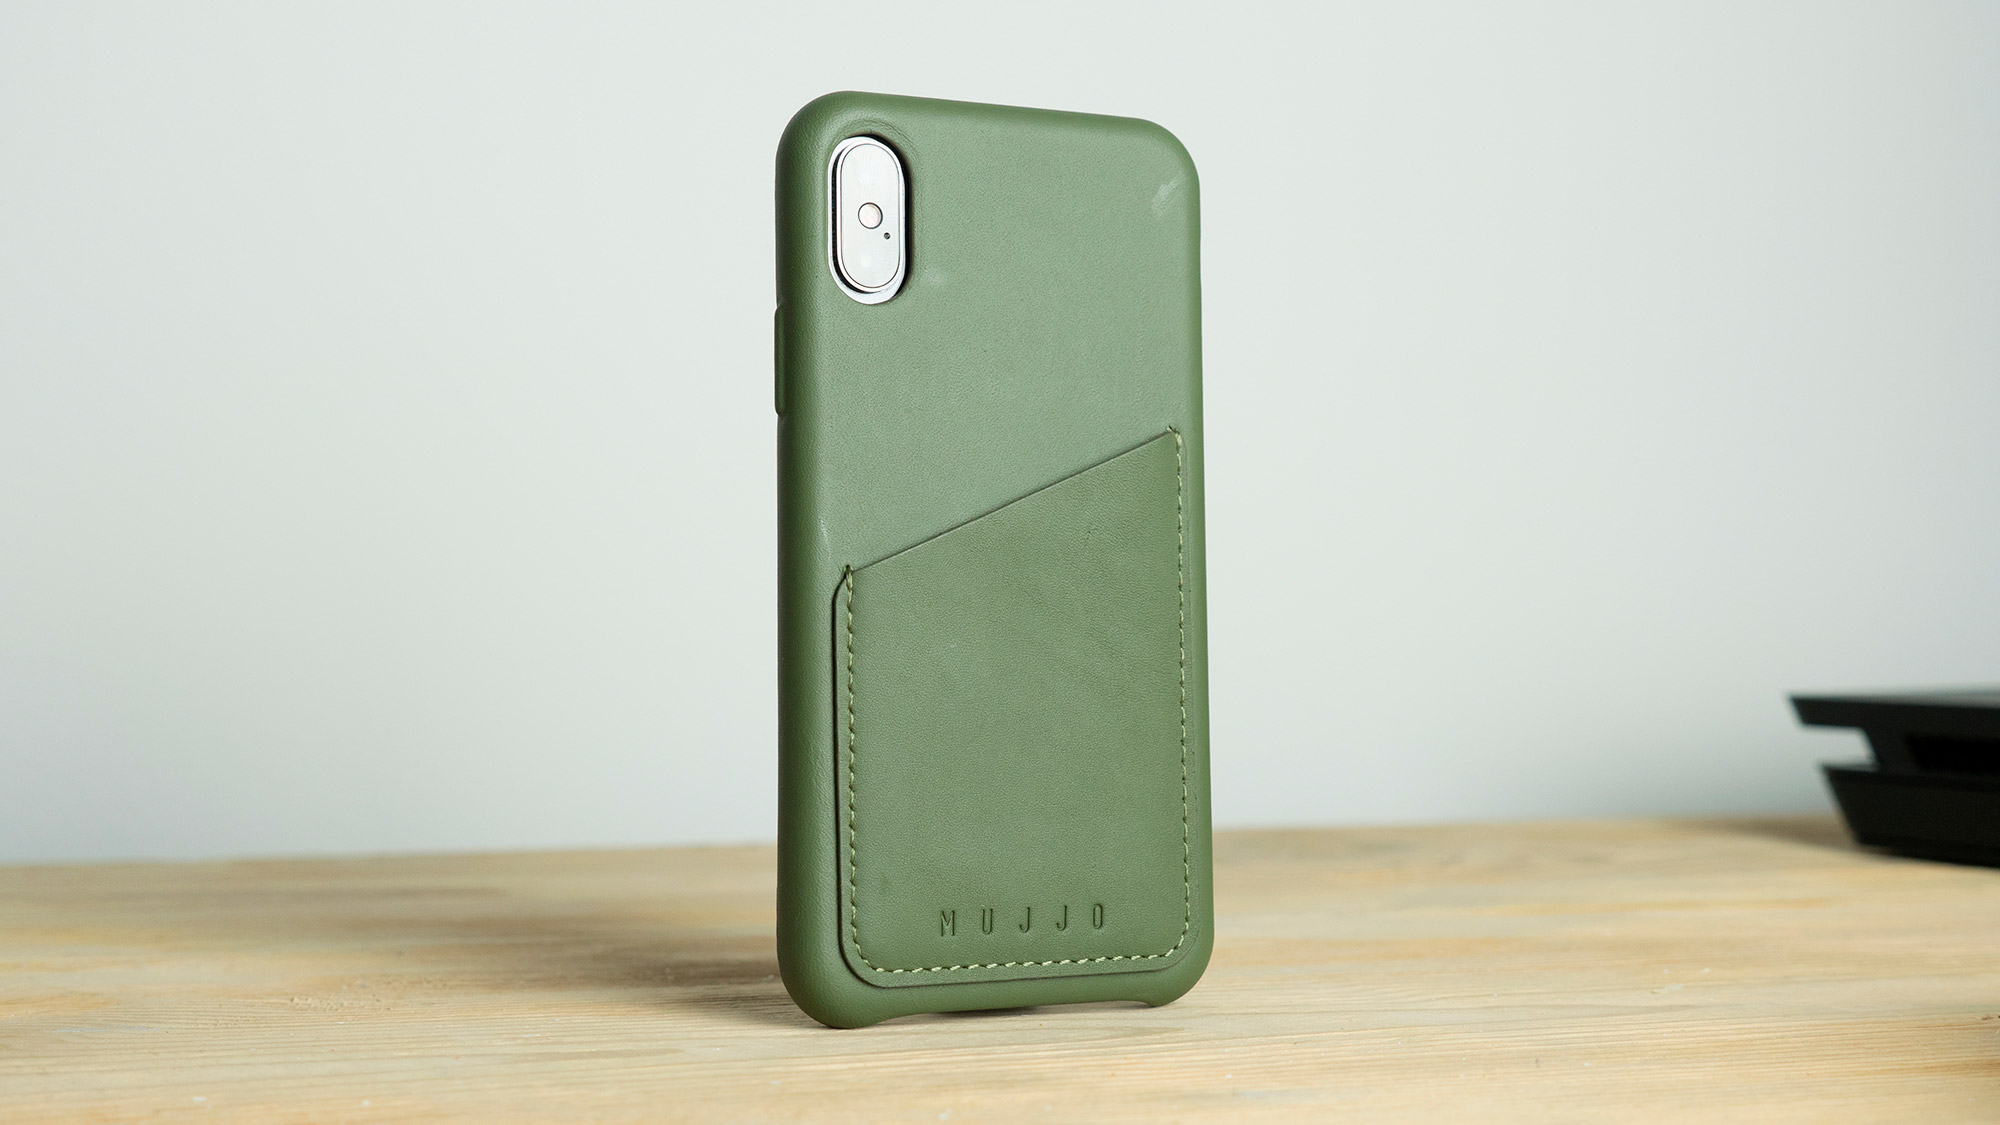 Mujjo Leather iPhone X Case